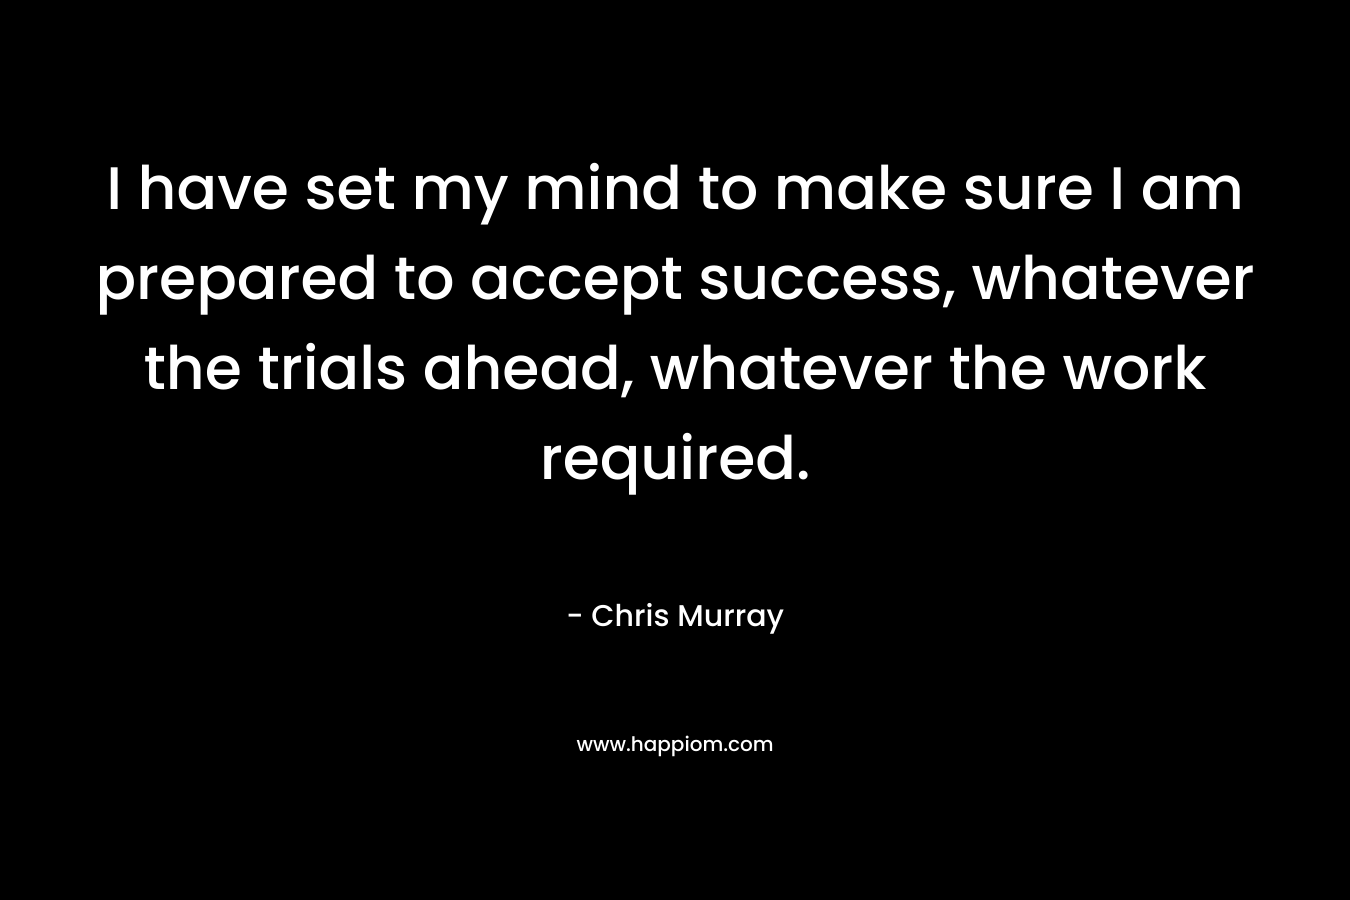 I have set my mind to make sure I am prepared to accept success, whatever the trials ahead, whatever the work required.